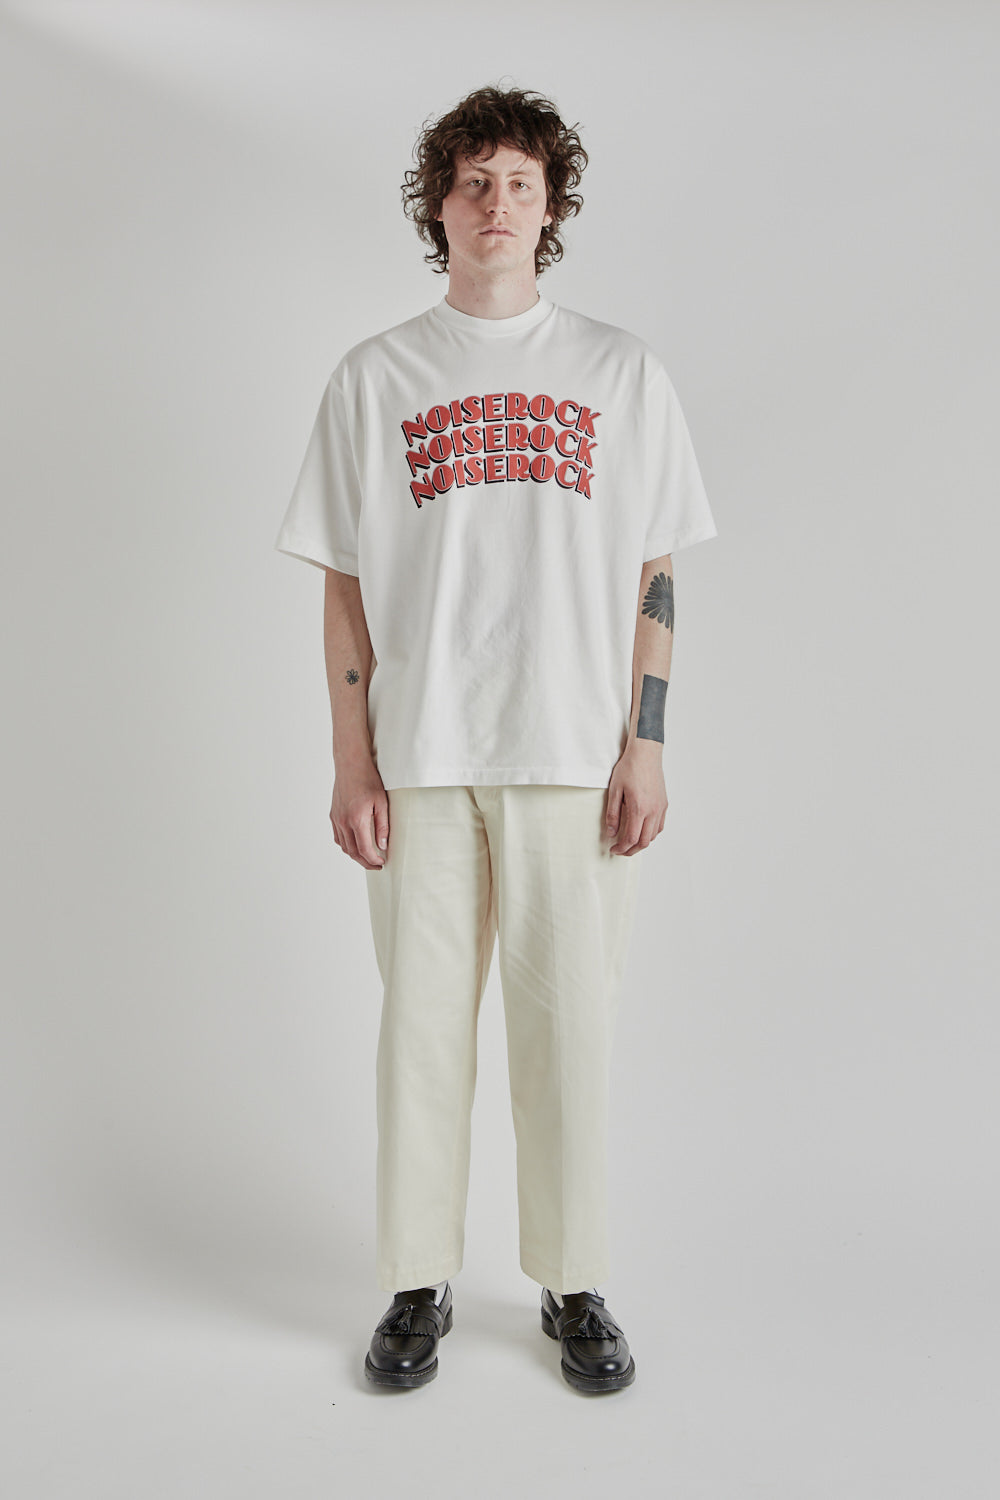 Blurhms Rootstock Noise Rock Print Wide Tee in White